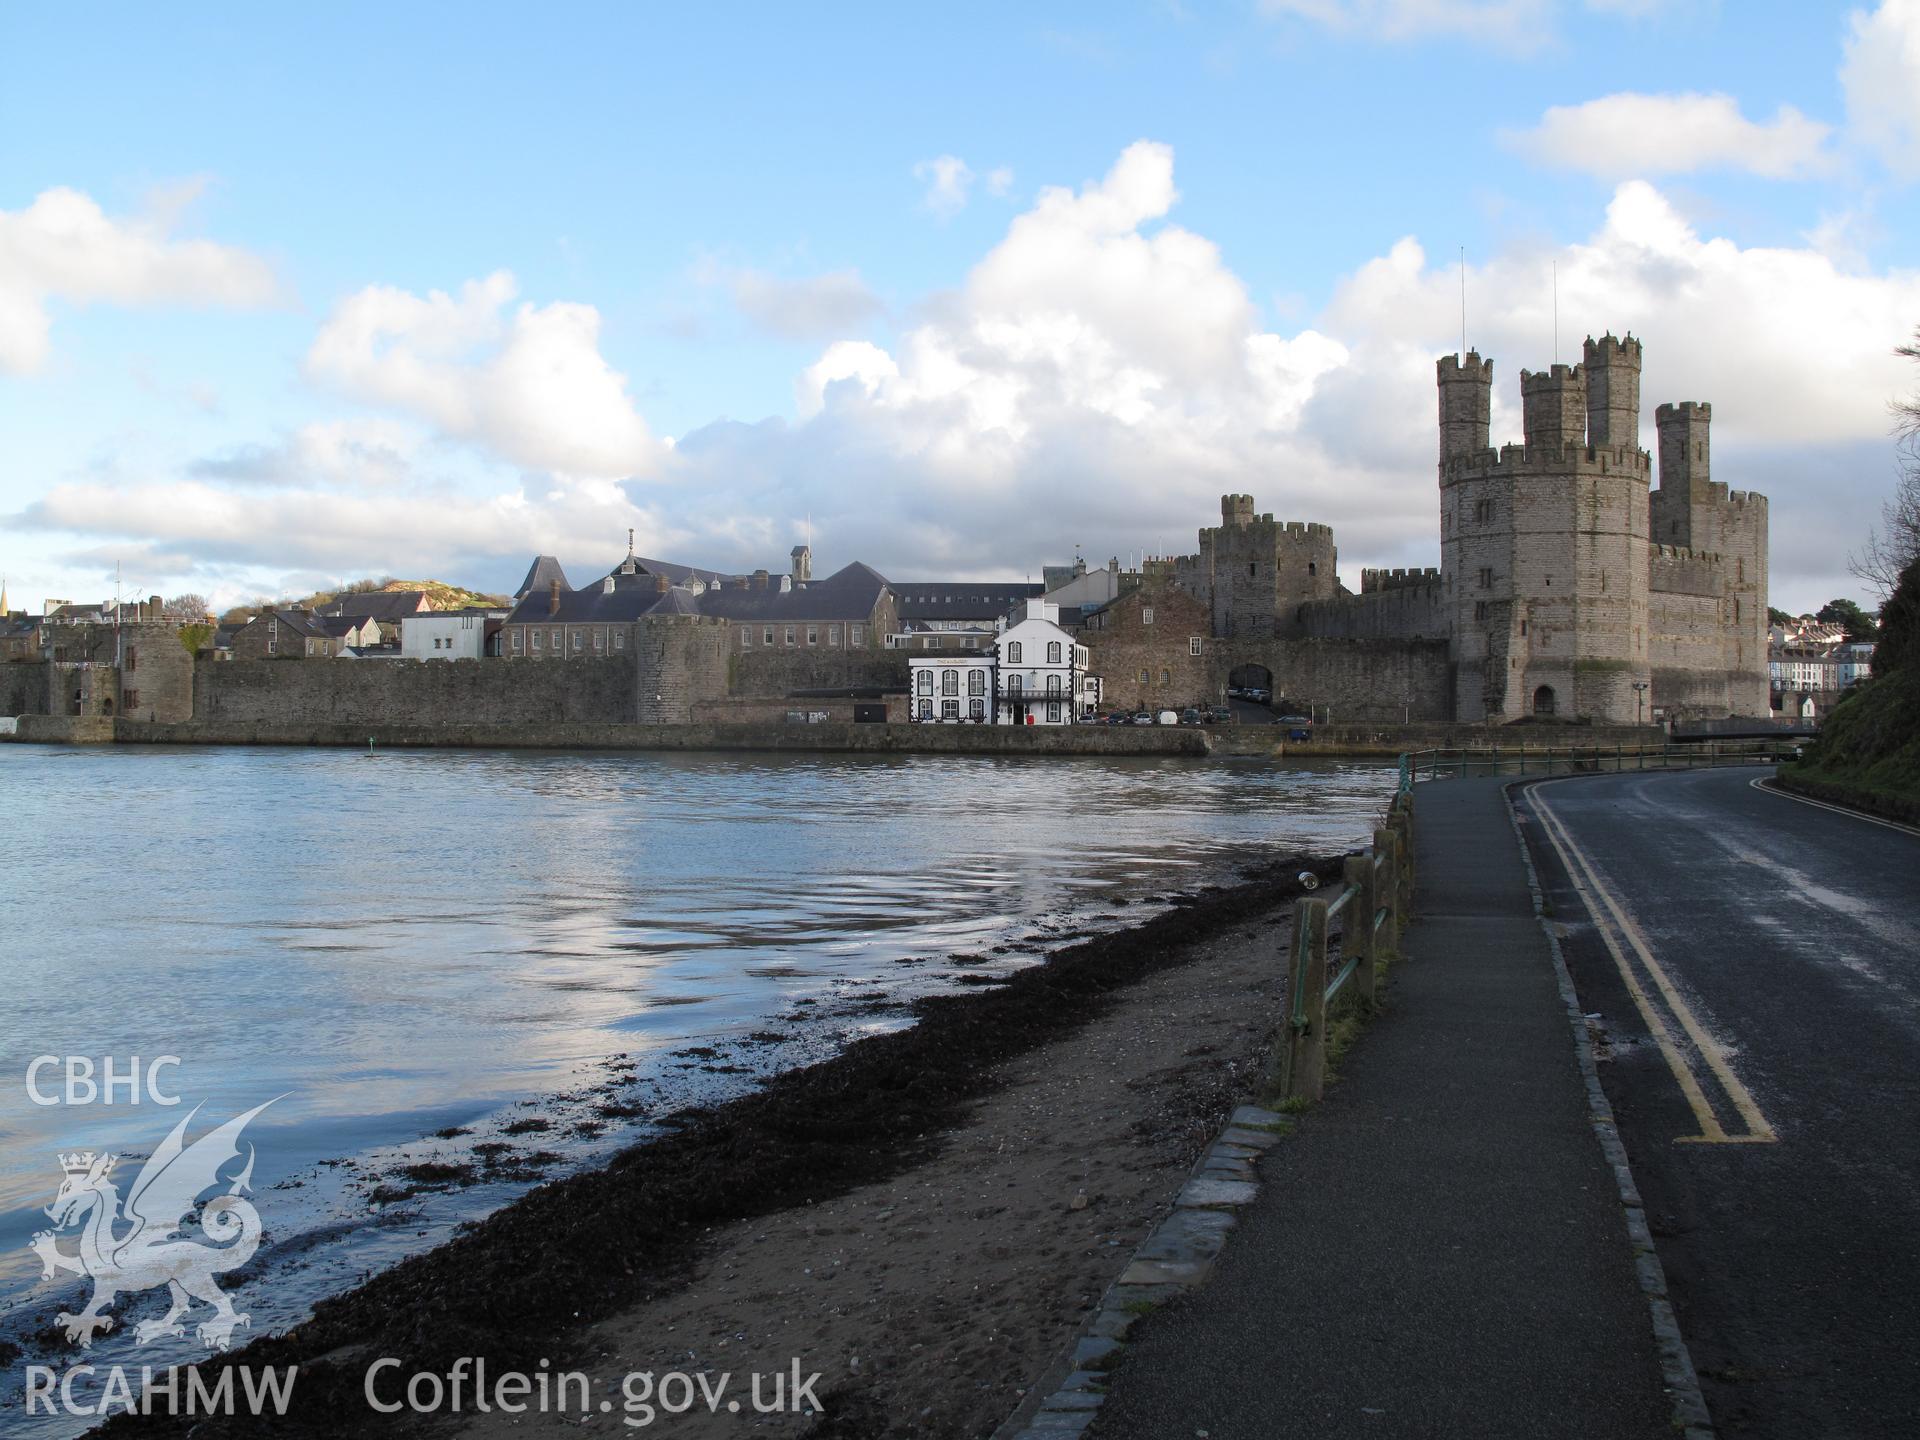 View of Twthill and Caernarfon Castle from the southwest, taken by Brian Malaws on 21 December 2009.